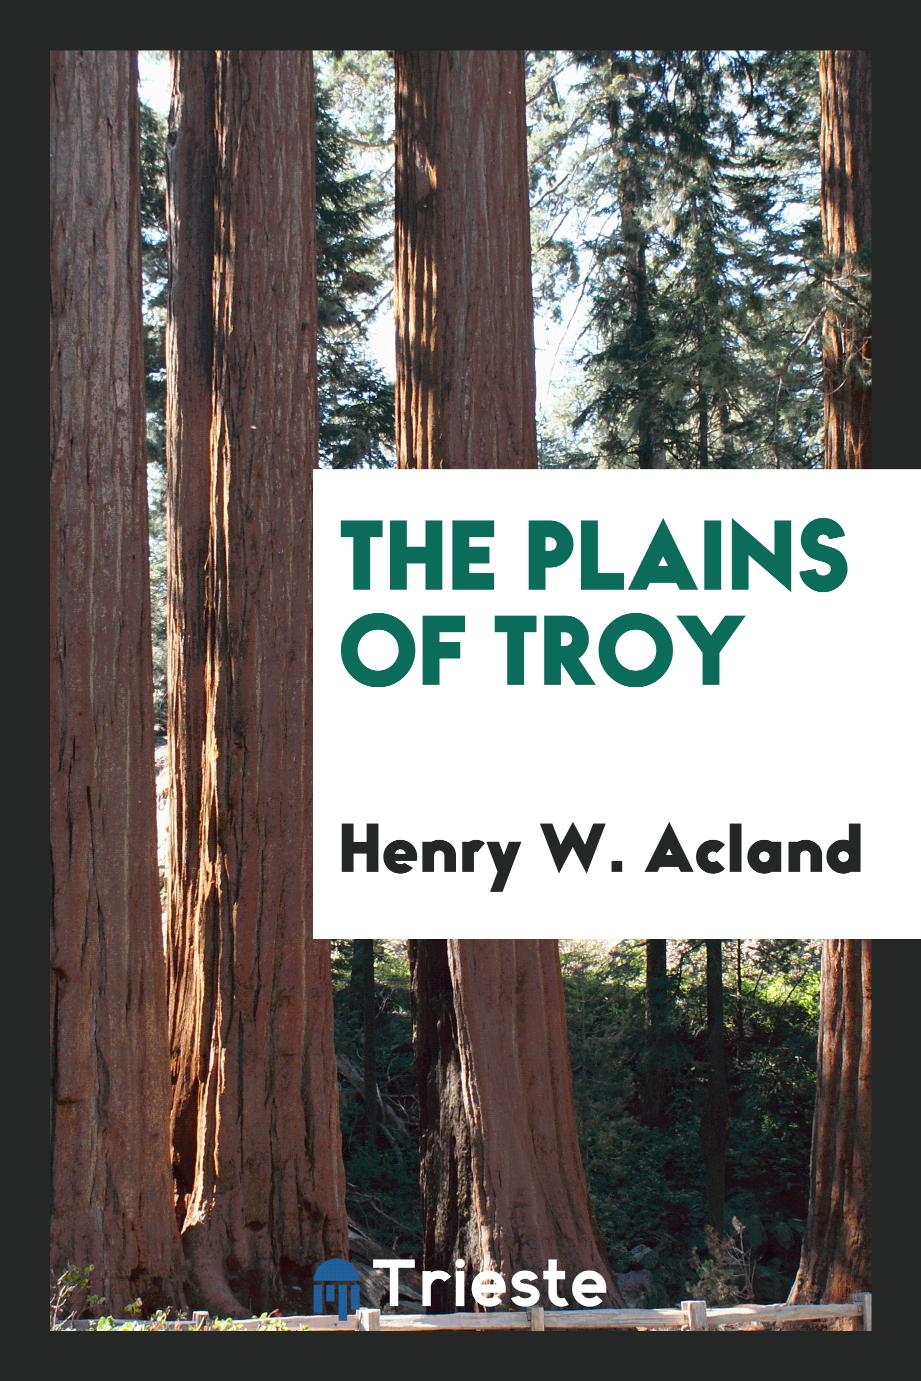 Henry W. Acland - The plains of Troy